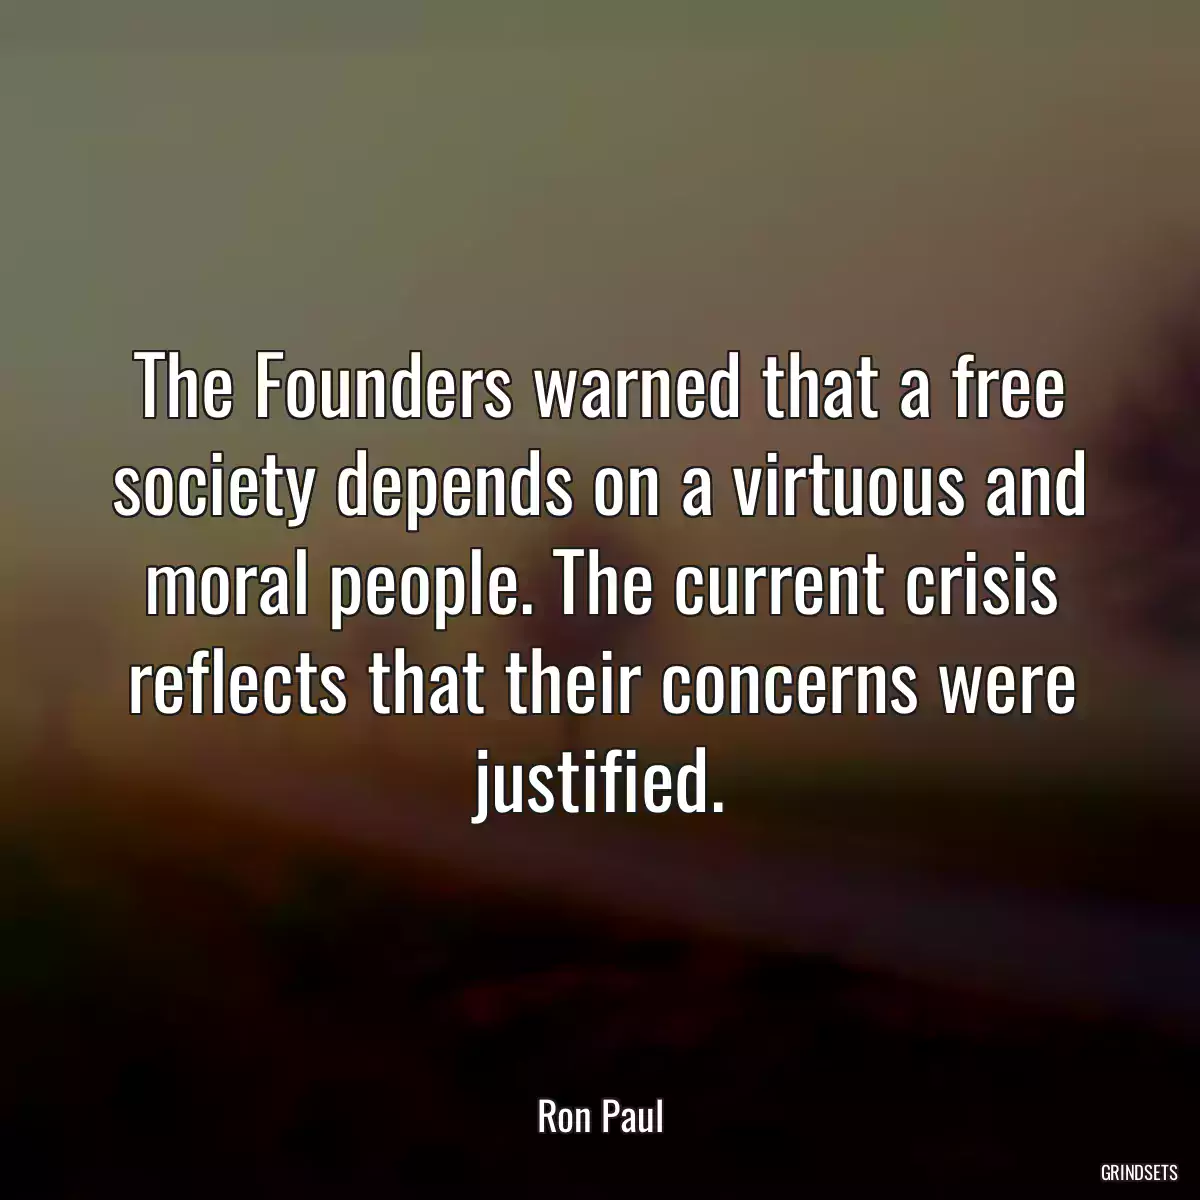 The Founders warned that a free society depends on a virtuous and moral people. The current crisis reflects that their concerns were justified.